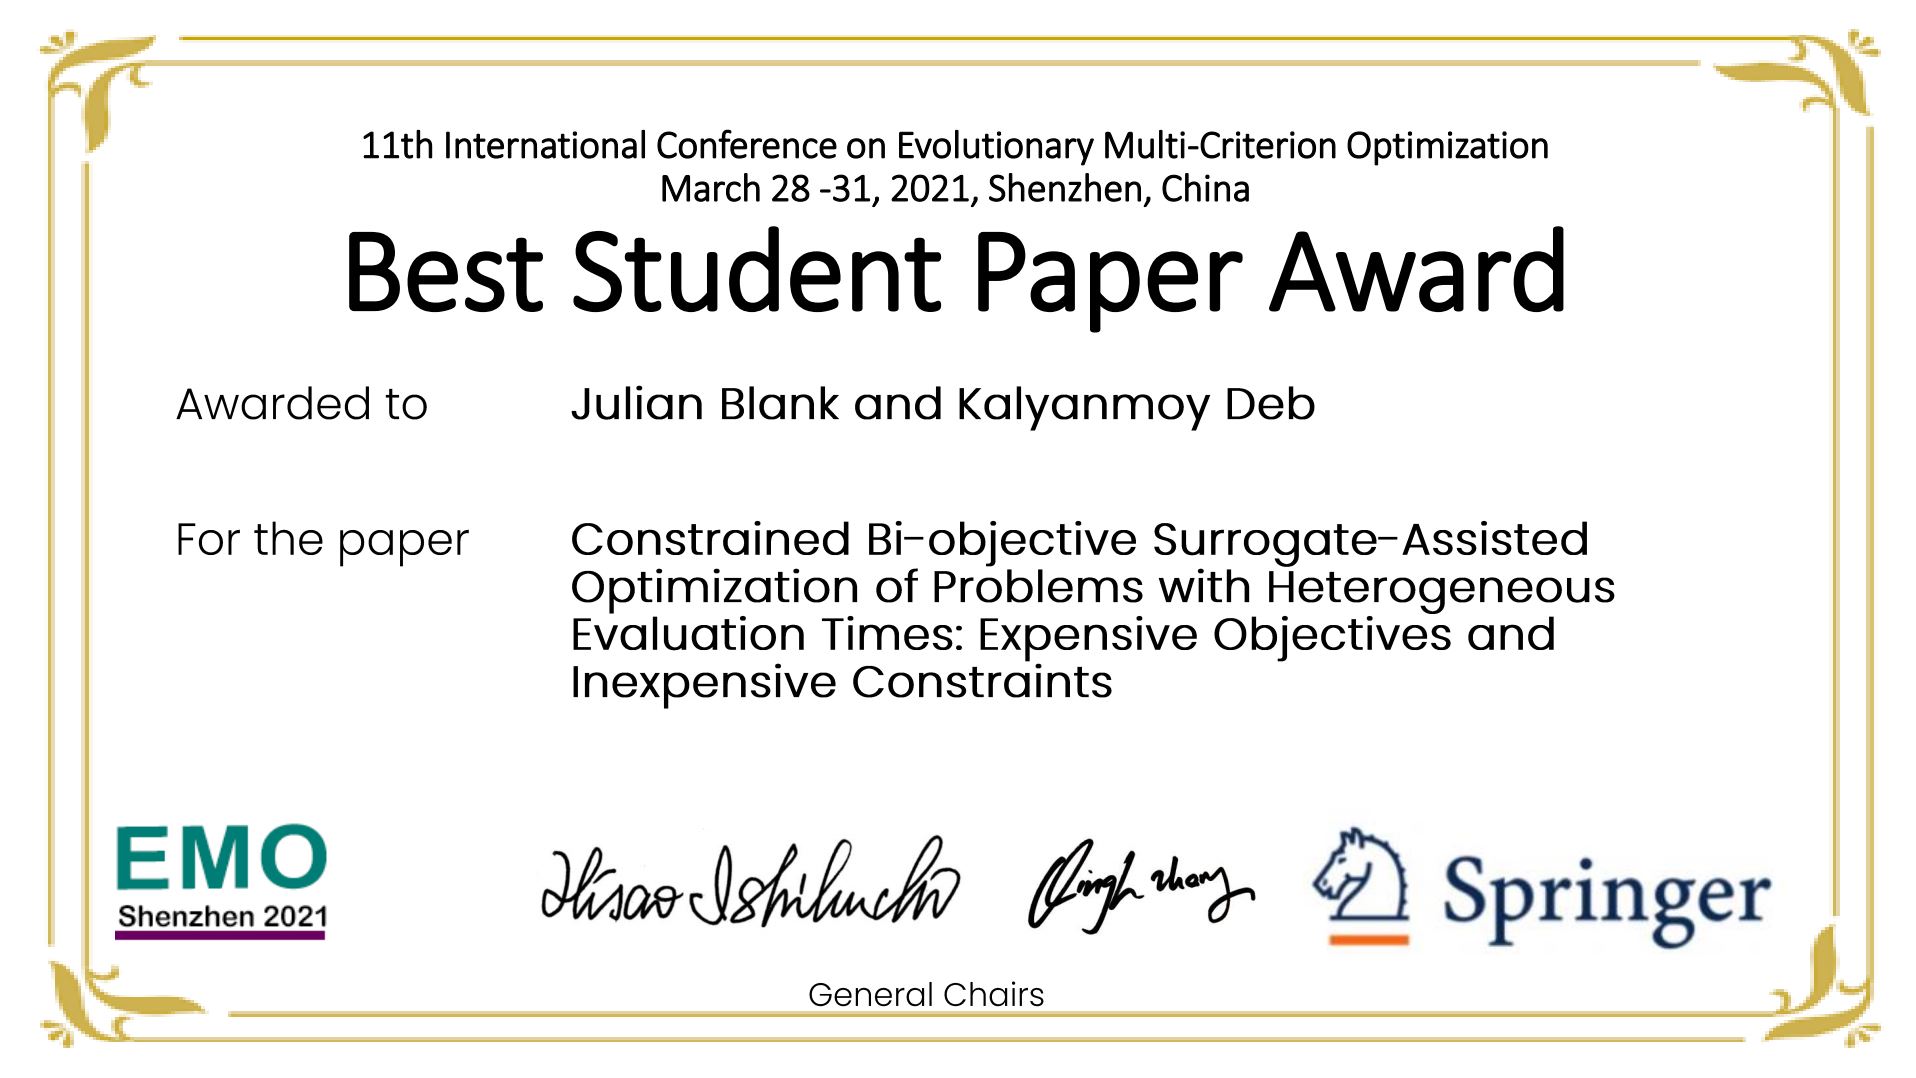 Constrained Bi-objective Surrogate-Assisted Optimization best paper award